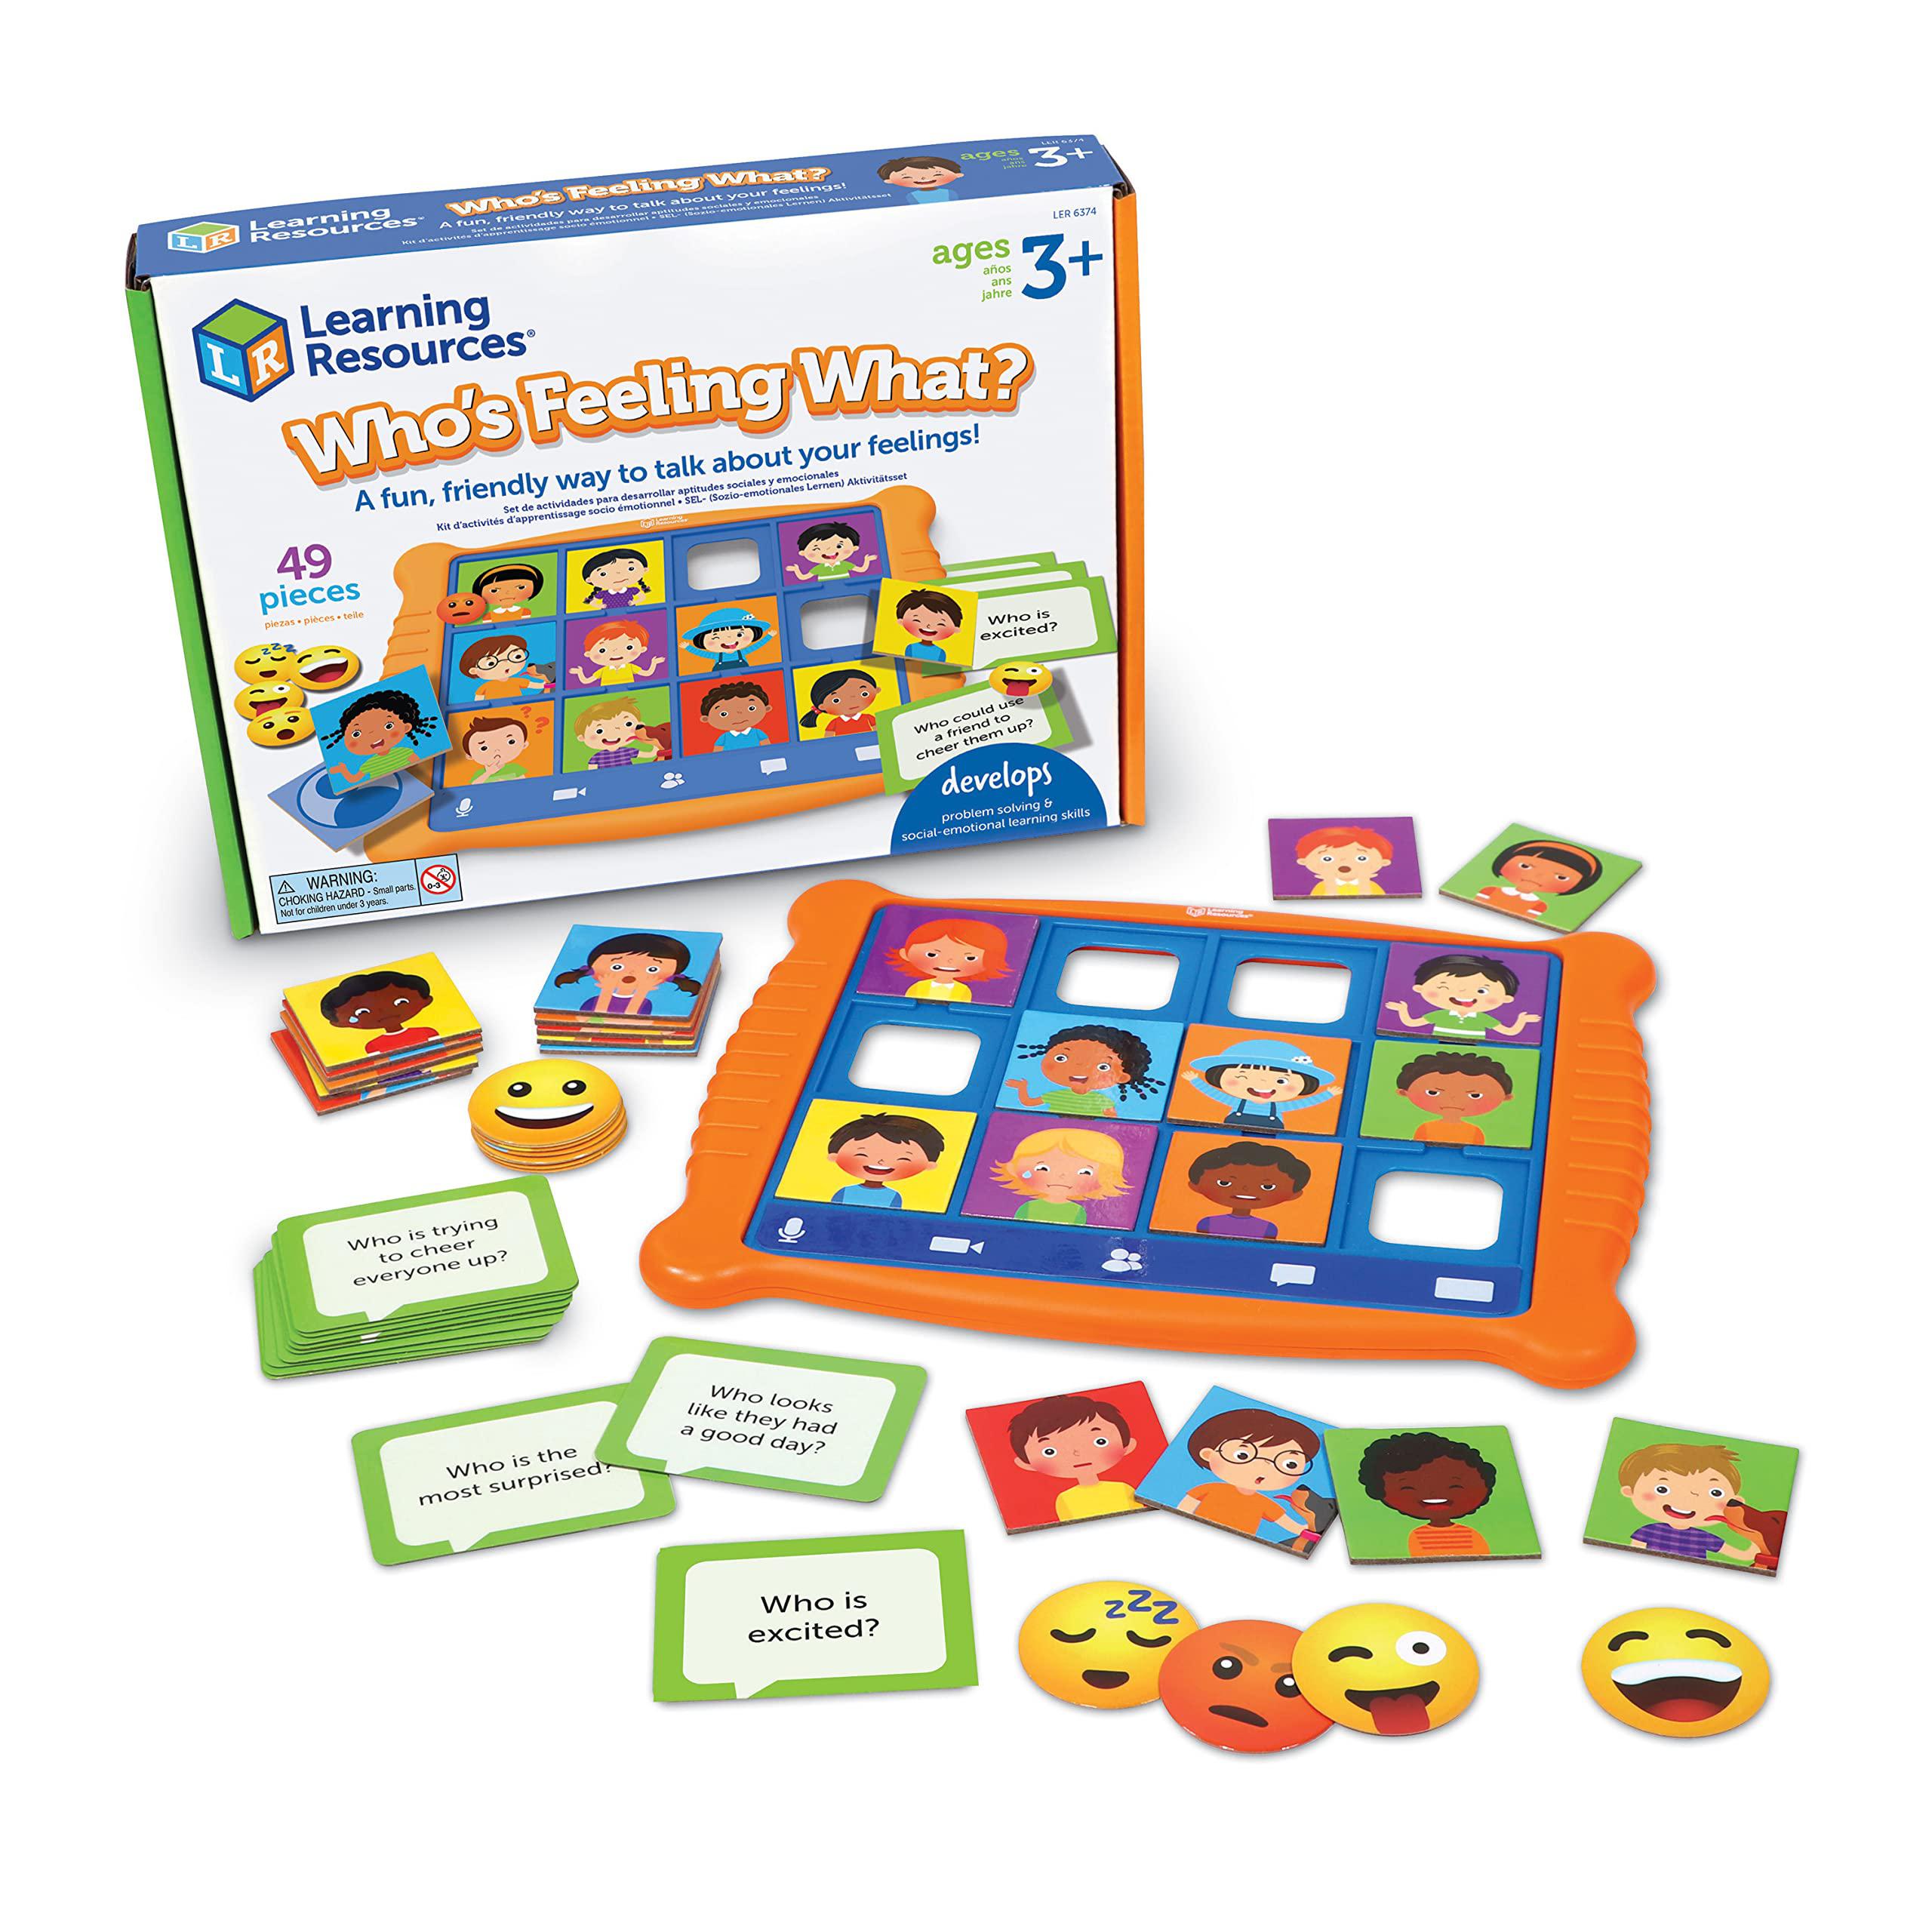 Learning Resources who's feeling what? ,social emotional learning games, communication games for kids, emotion toys, feeling toys for kids, 49 p